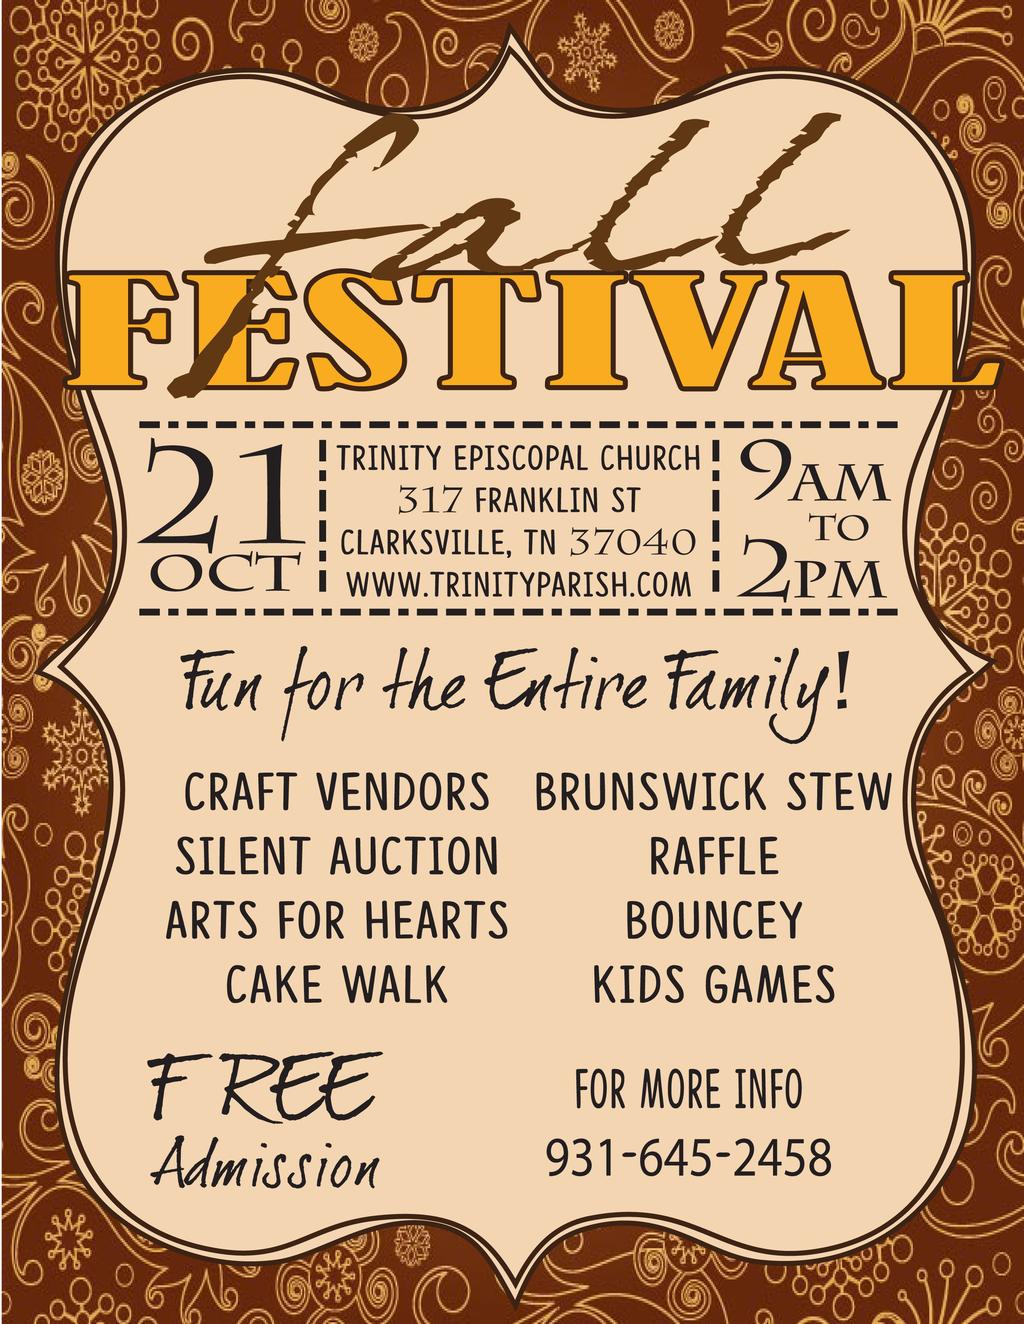 Mark your calendars for this year s Fall Festival.